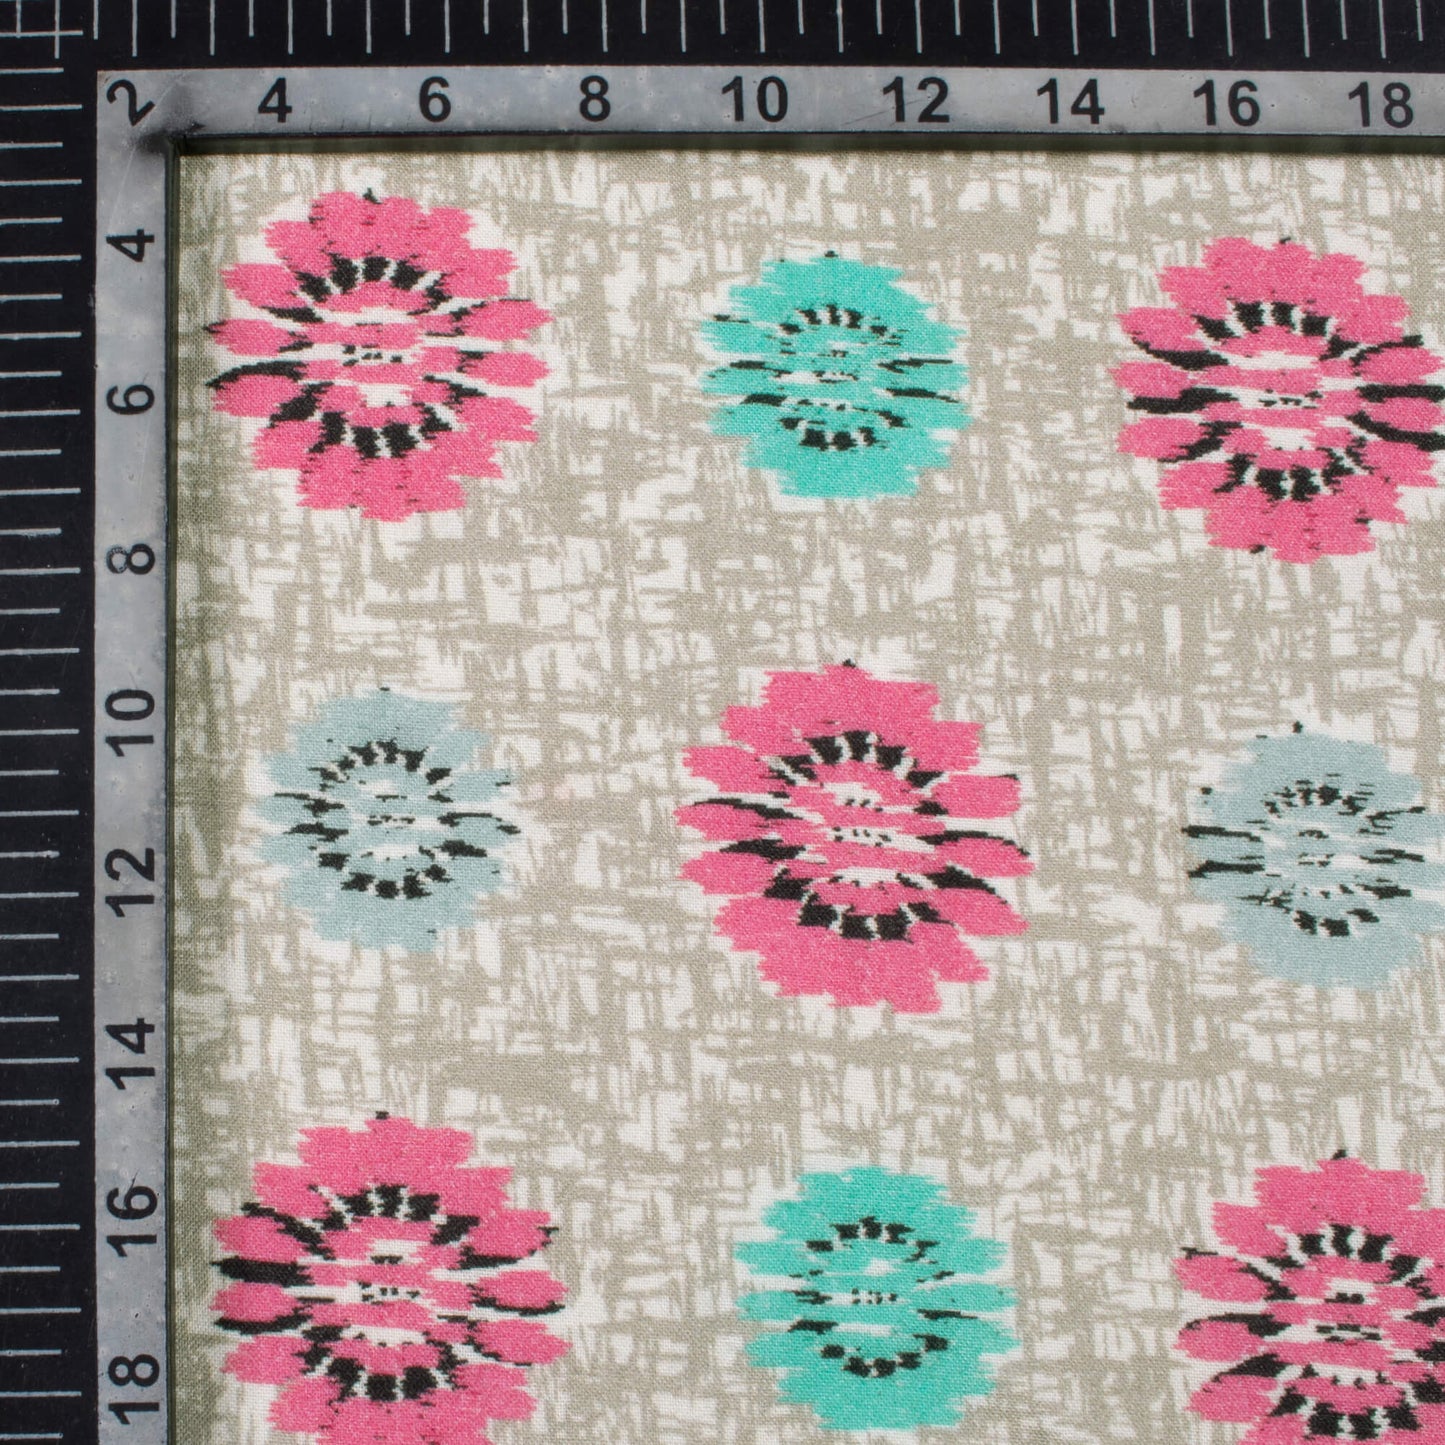 Trout Grey And Taffy Pink Geometric Pattern Digital Print Viscose Rayon Fabric (Width 58 Inches)